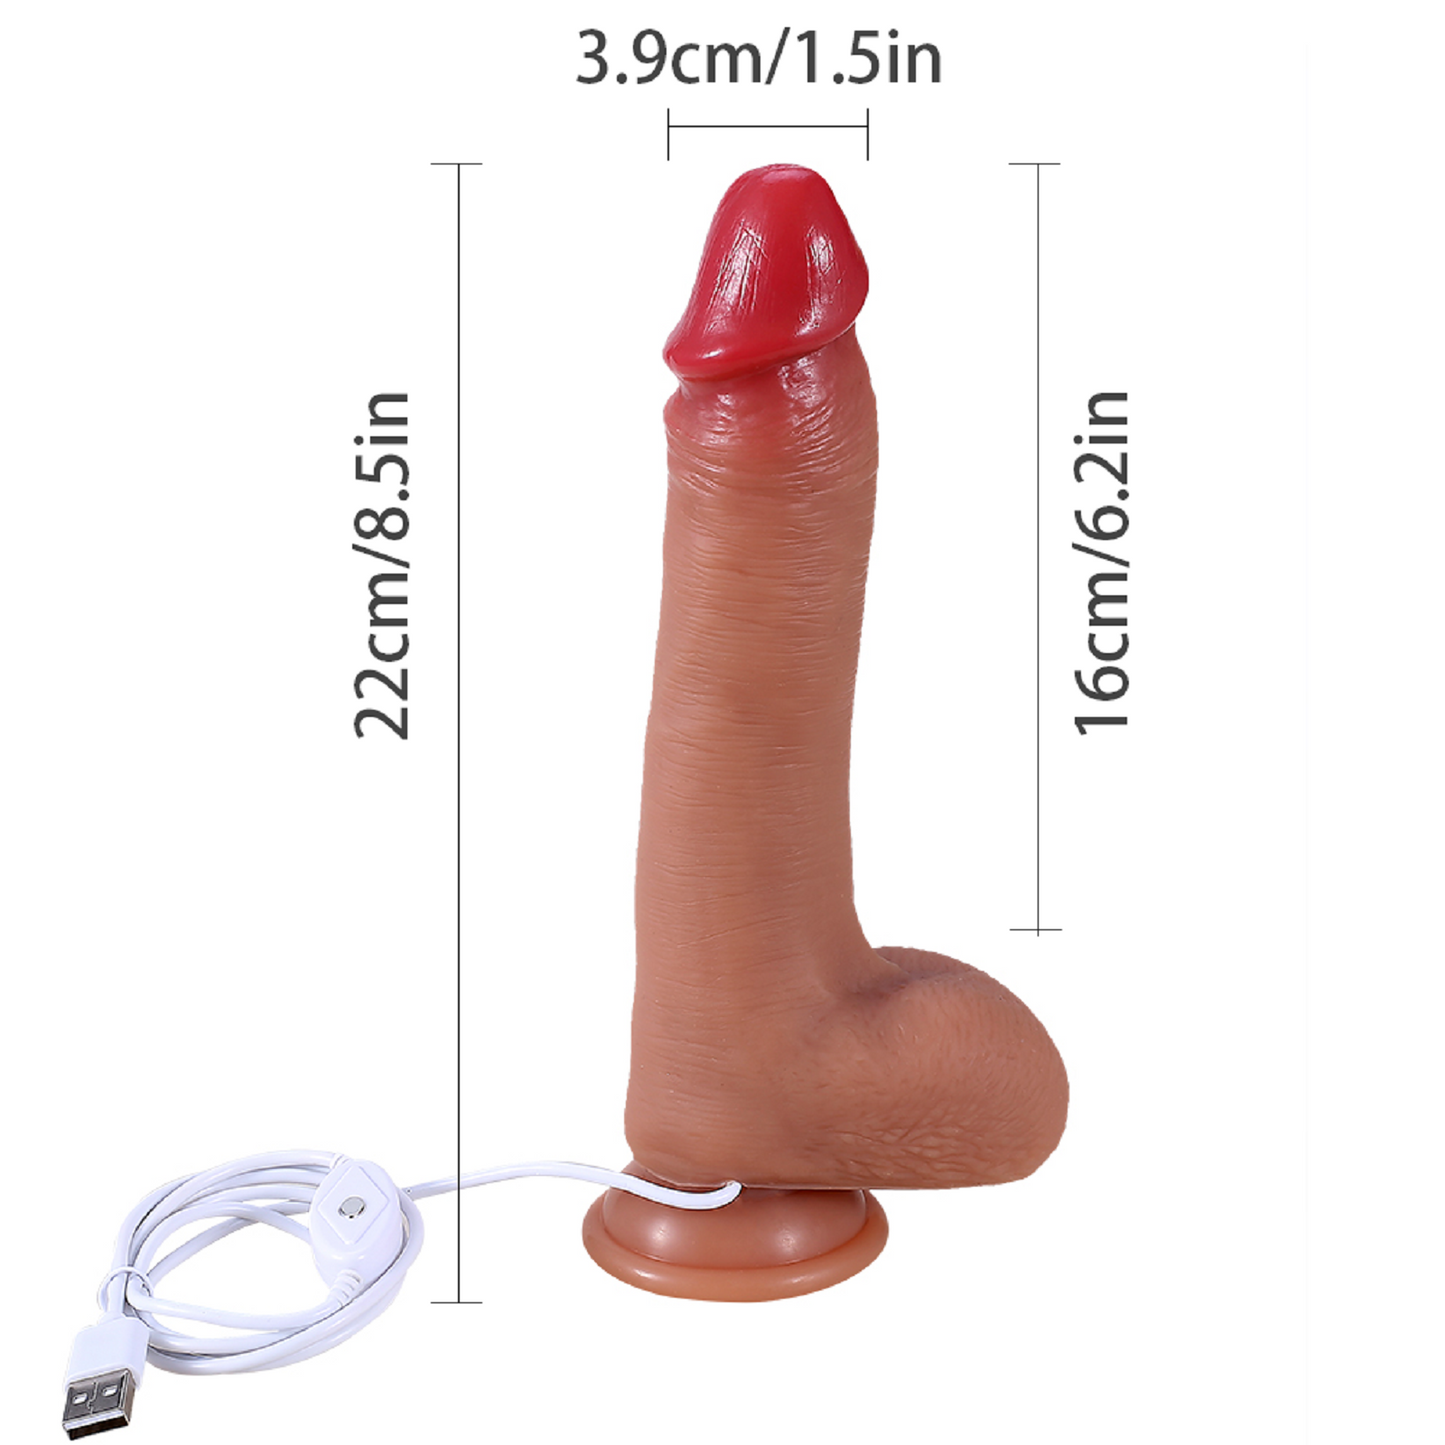 Wired Dildo Vibrator Swing Telescopic Thrusting Dong Wriggle GSpot Penis Sex Toy